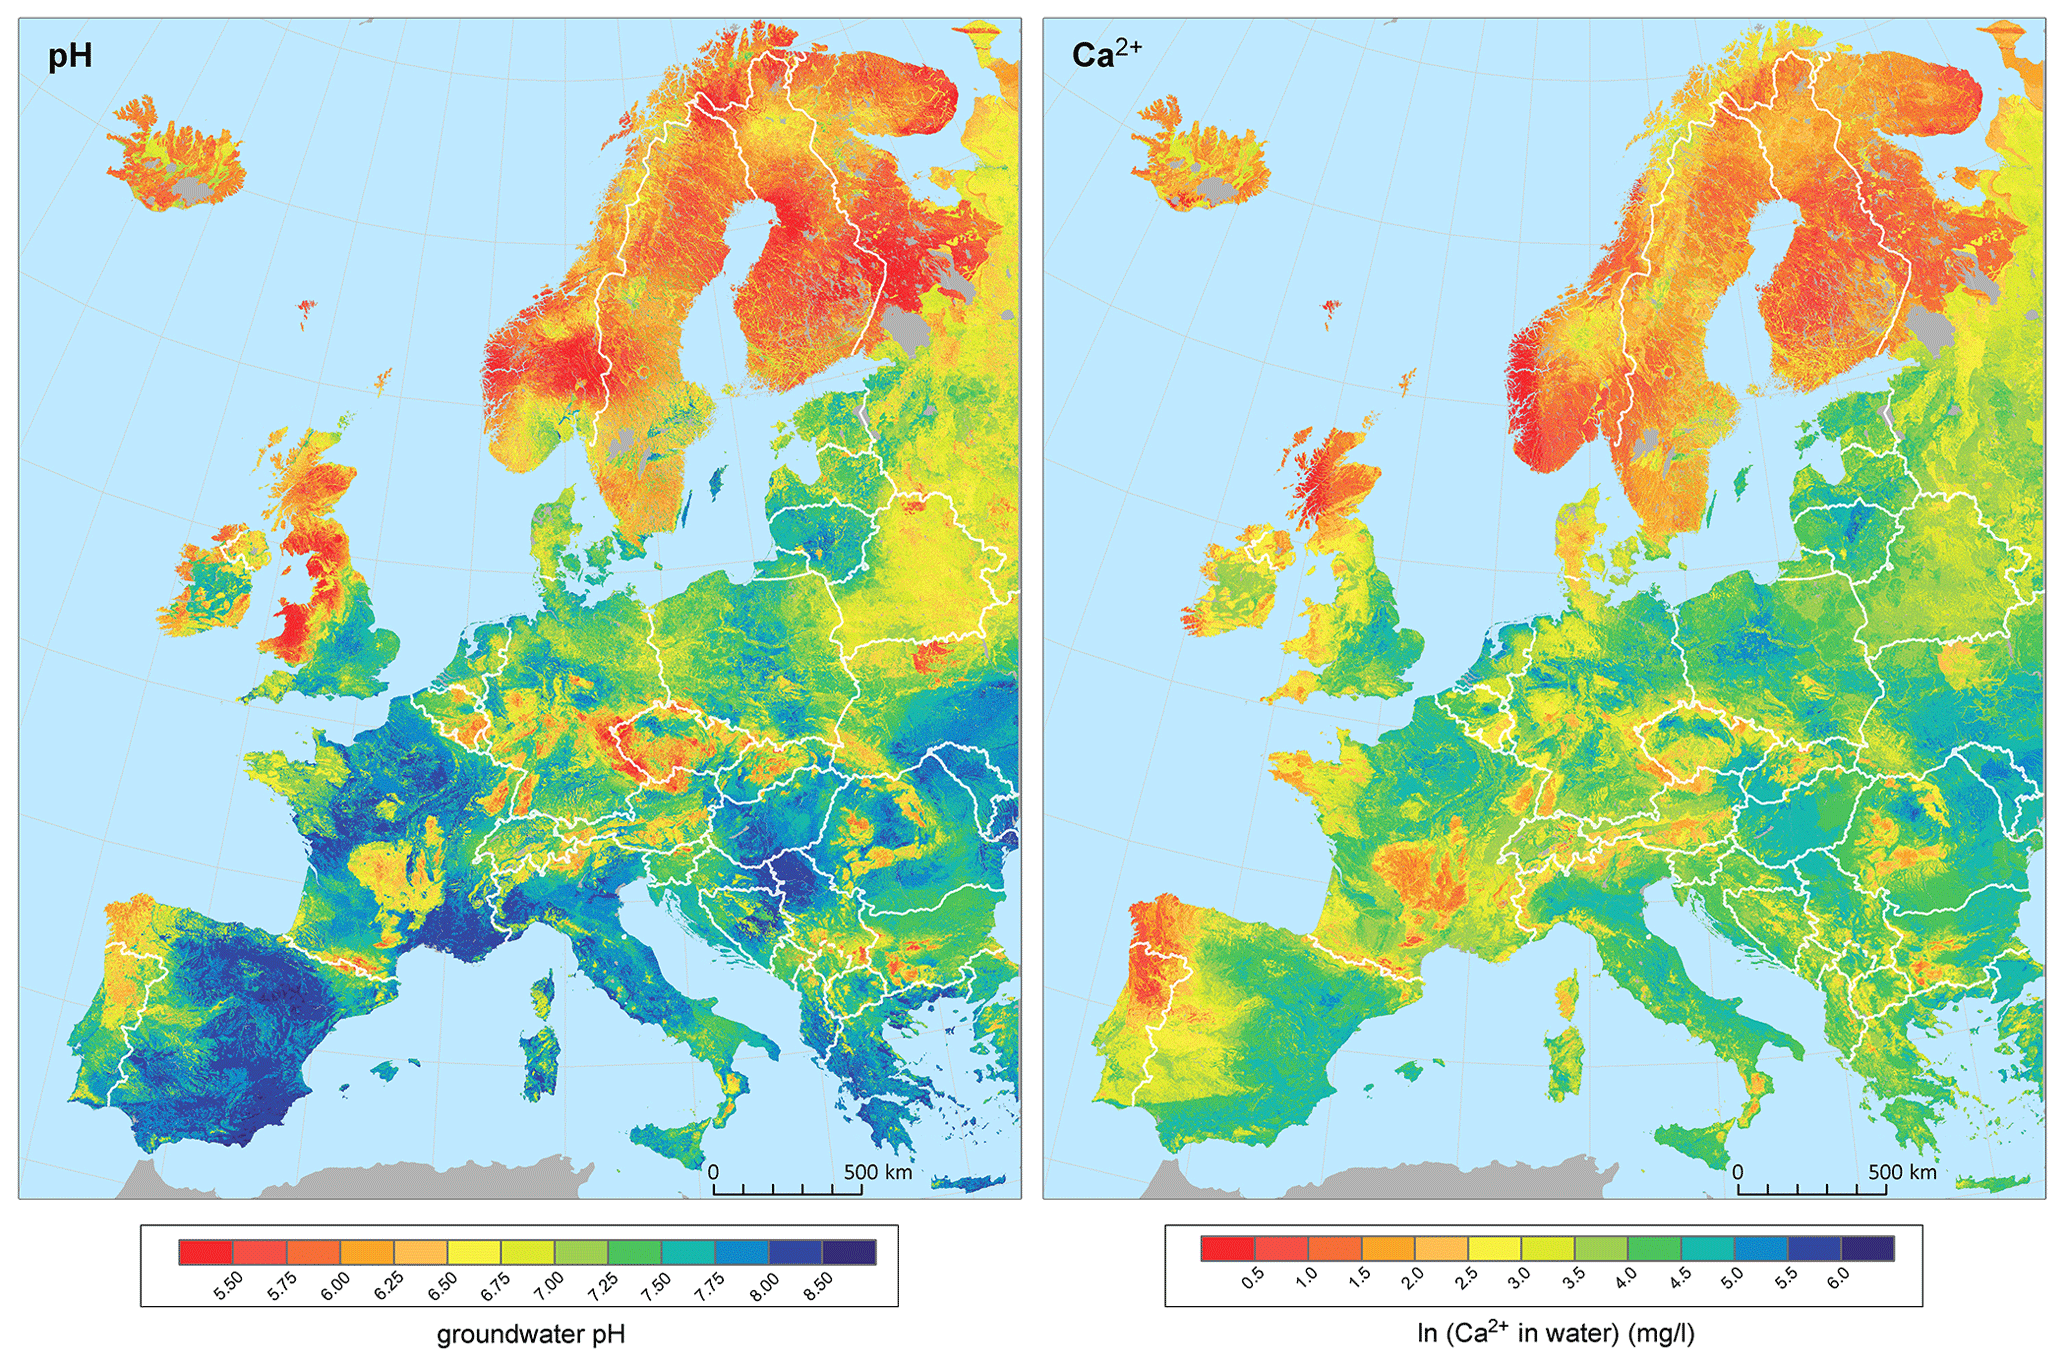 Essd A European Map Of Groundwater Ph And Calcium